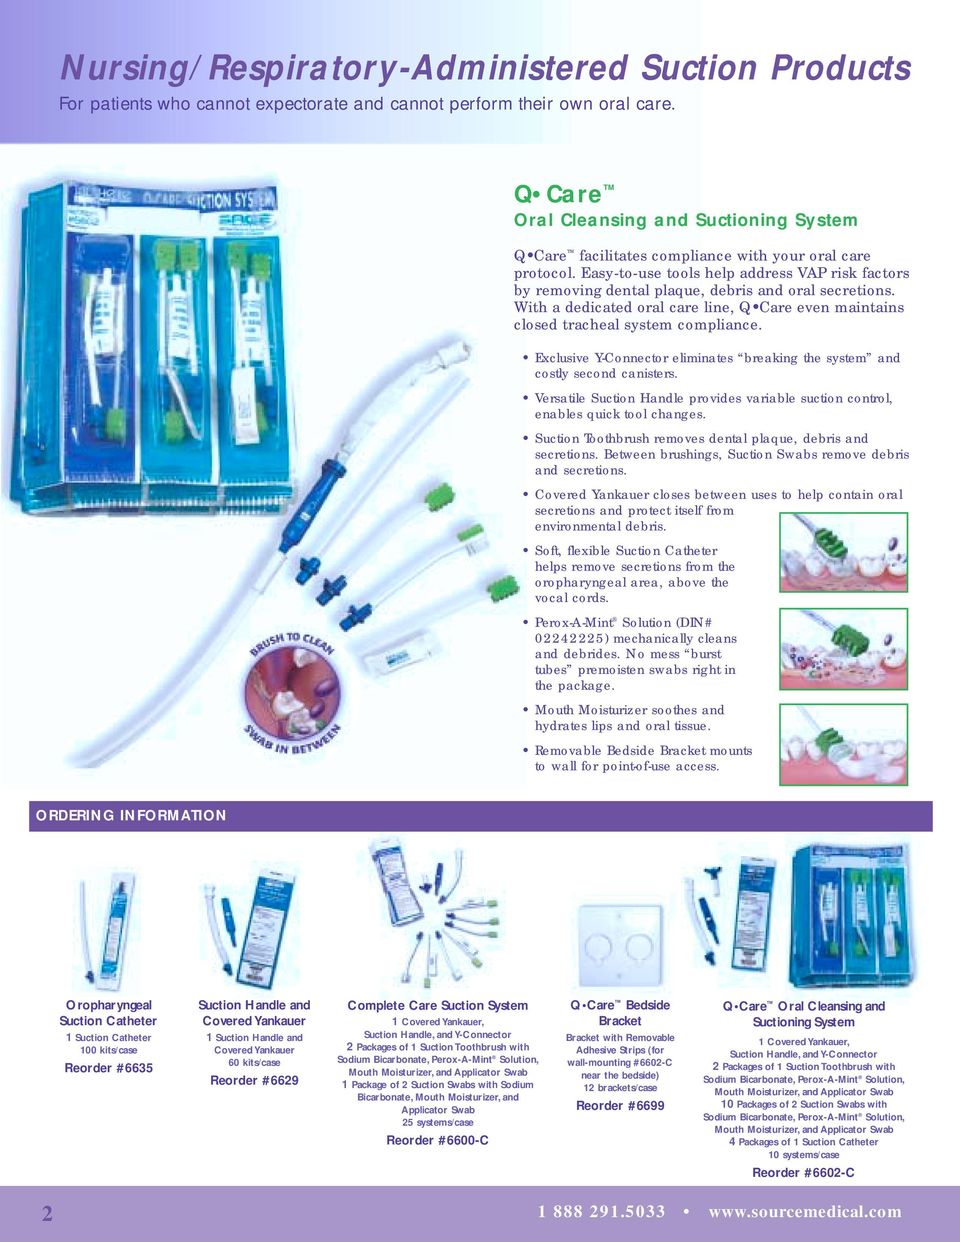 Easy-to-use tools help address VAP risk factors by removing dental plaque, debris and oral secretions. With a dedicated oral care line, Q Care even maintains closed tracheal system compliance.